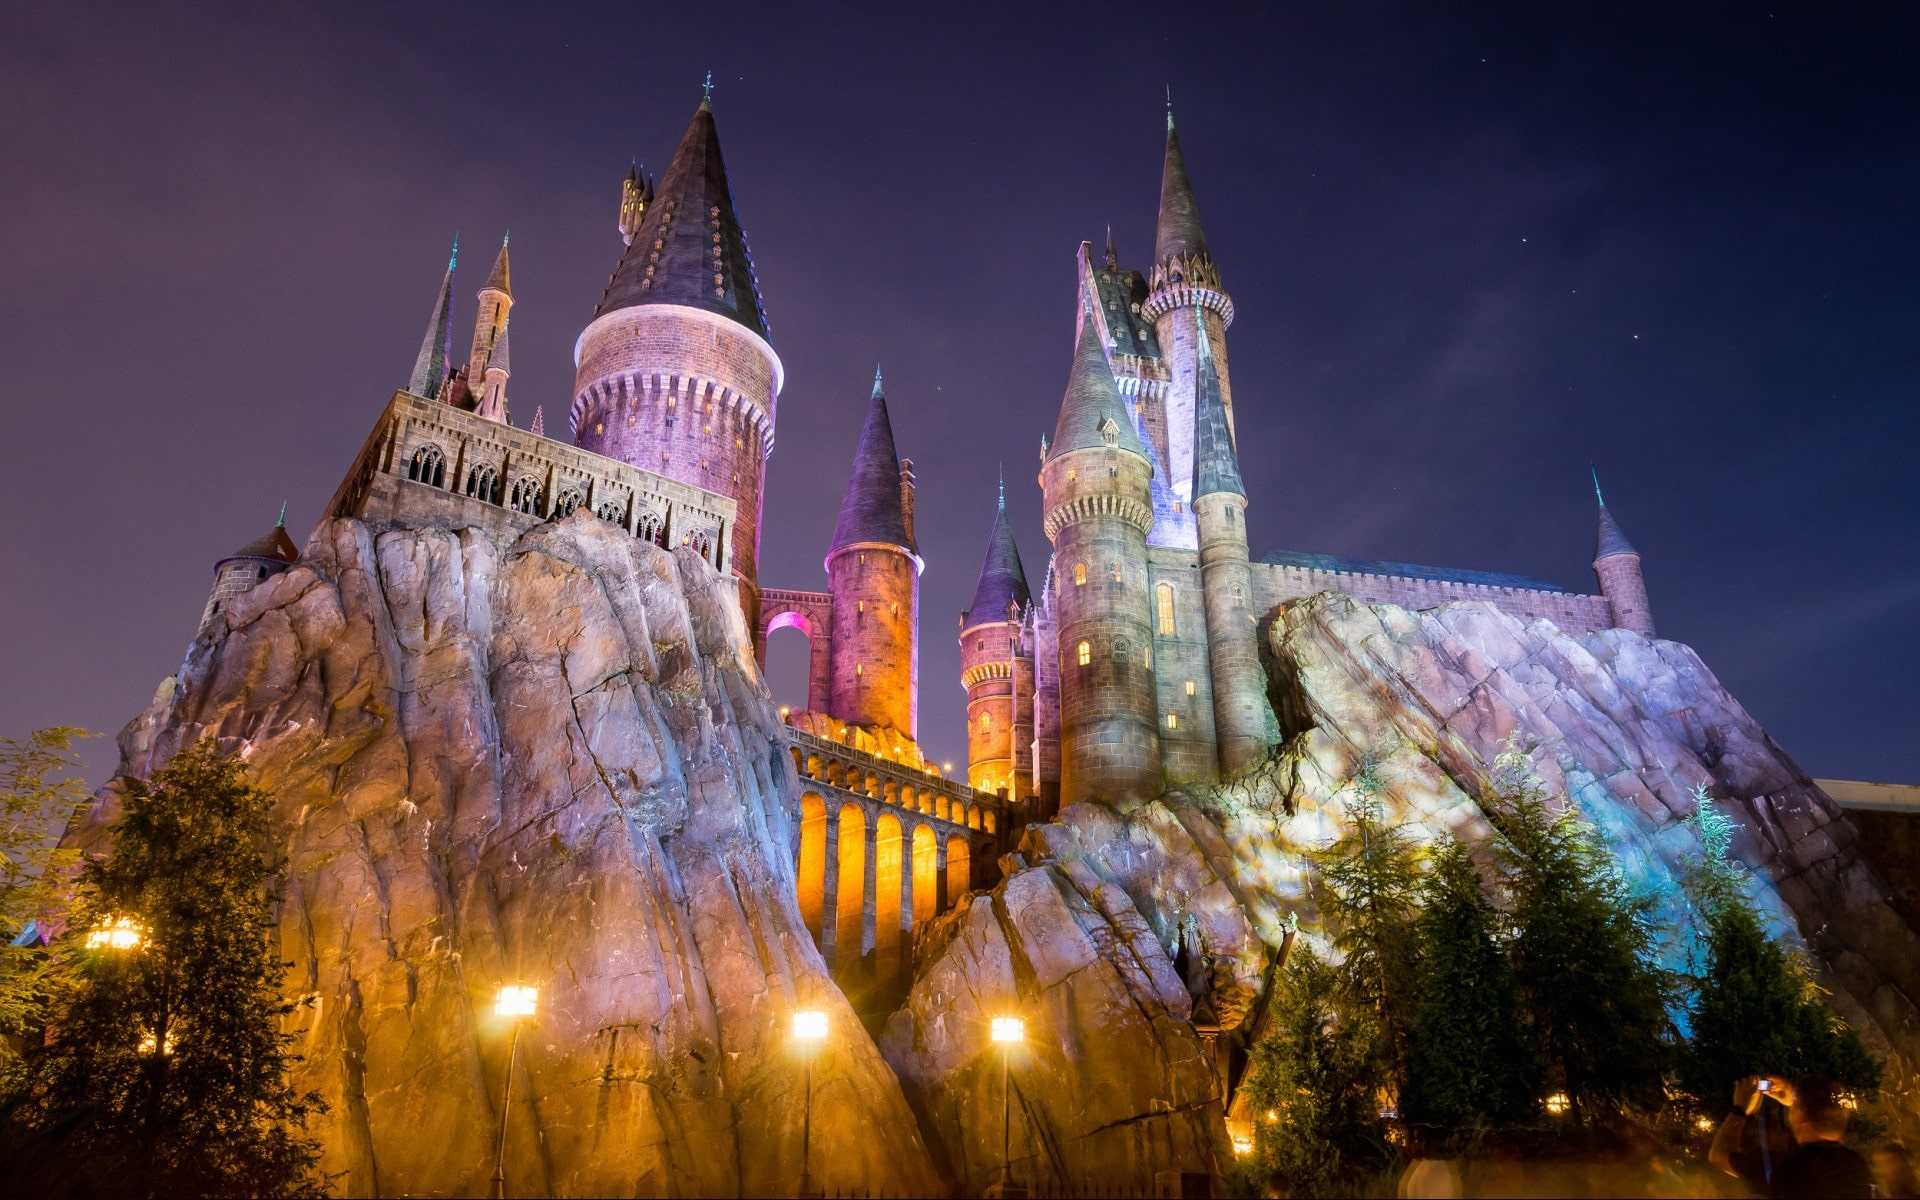 Hogwarts castle at night at Universal Studios Florida, with a starry sky above. - Hogwarts